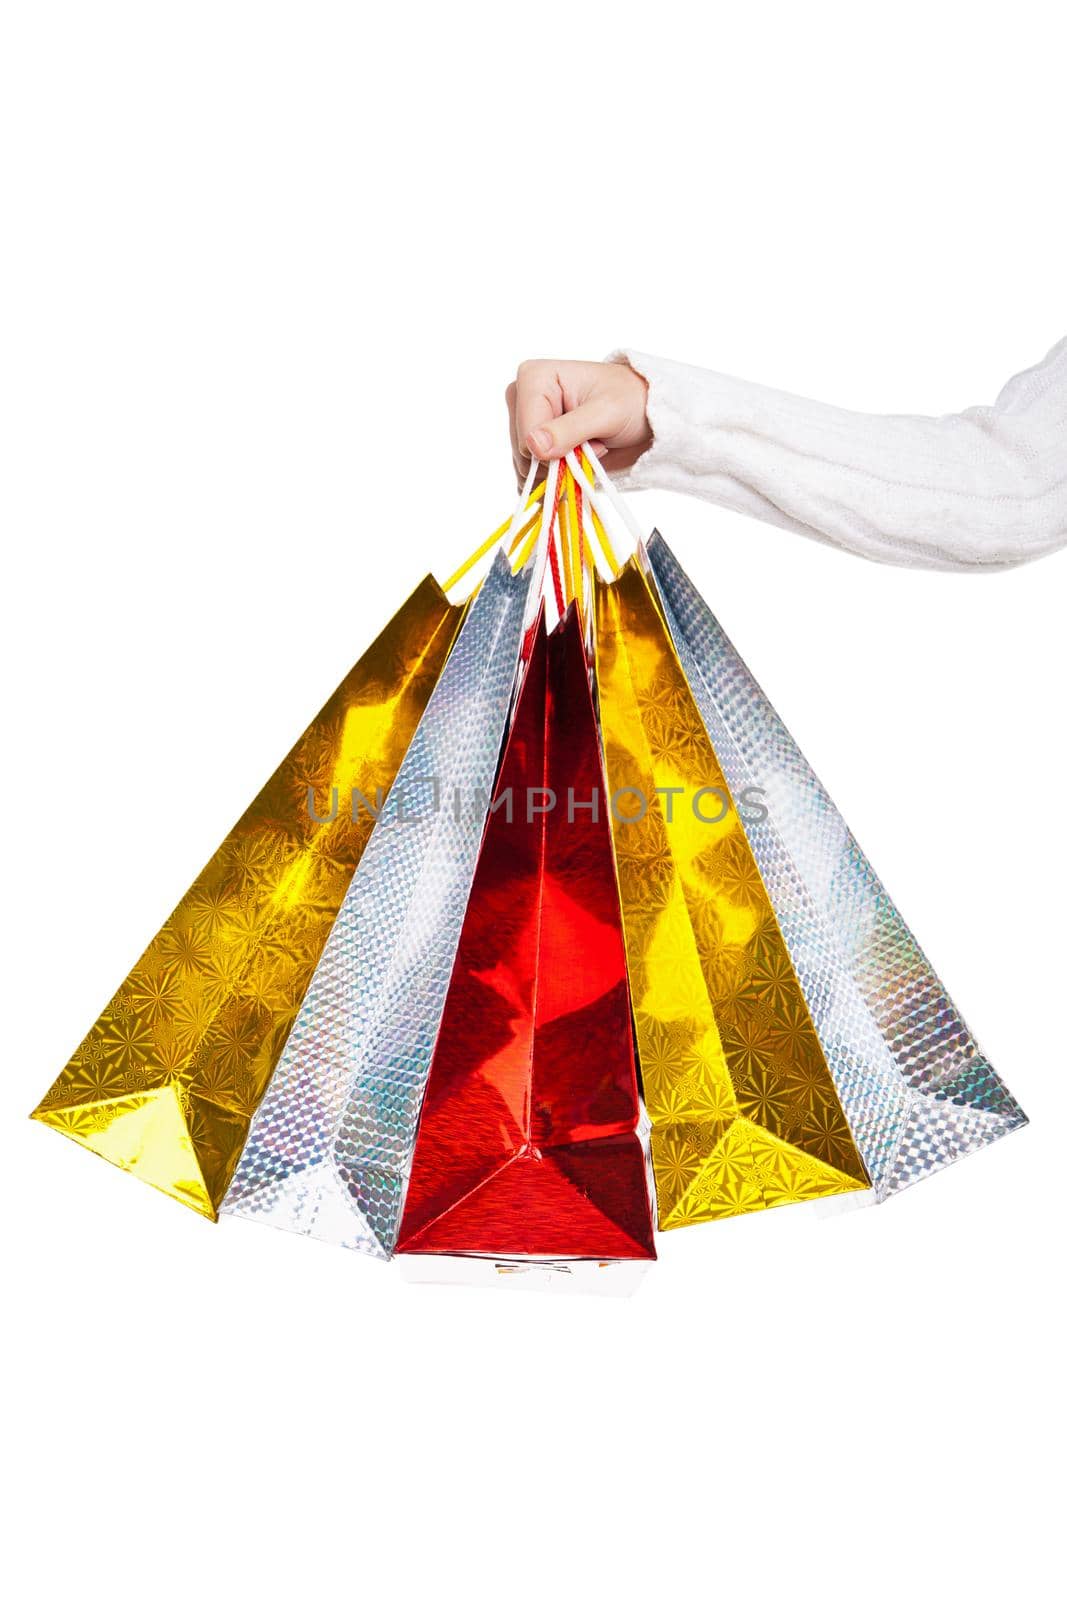 Womans hand holding colorful shopping bags by Julenochek